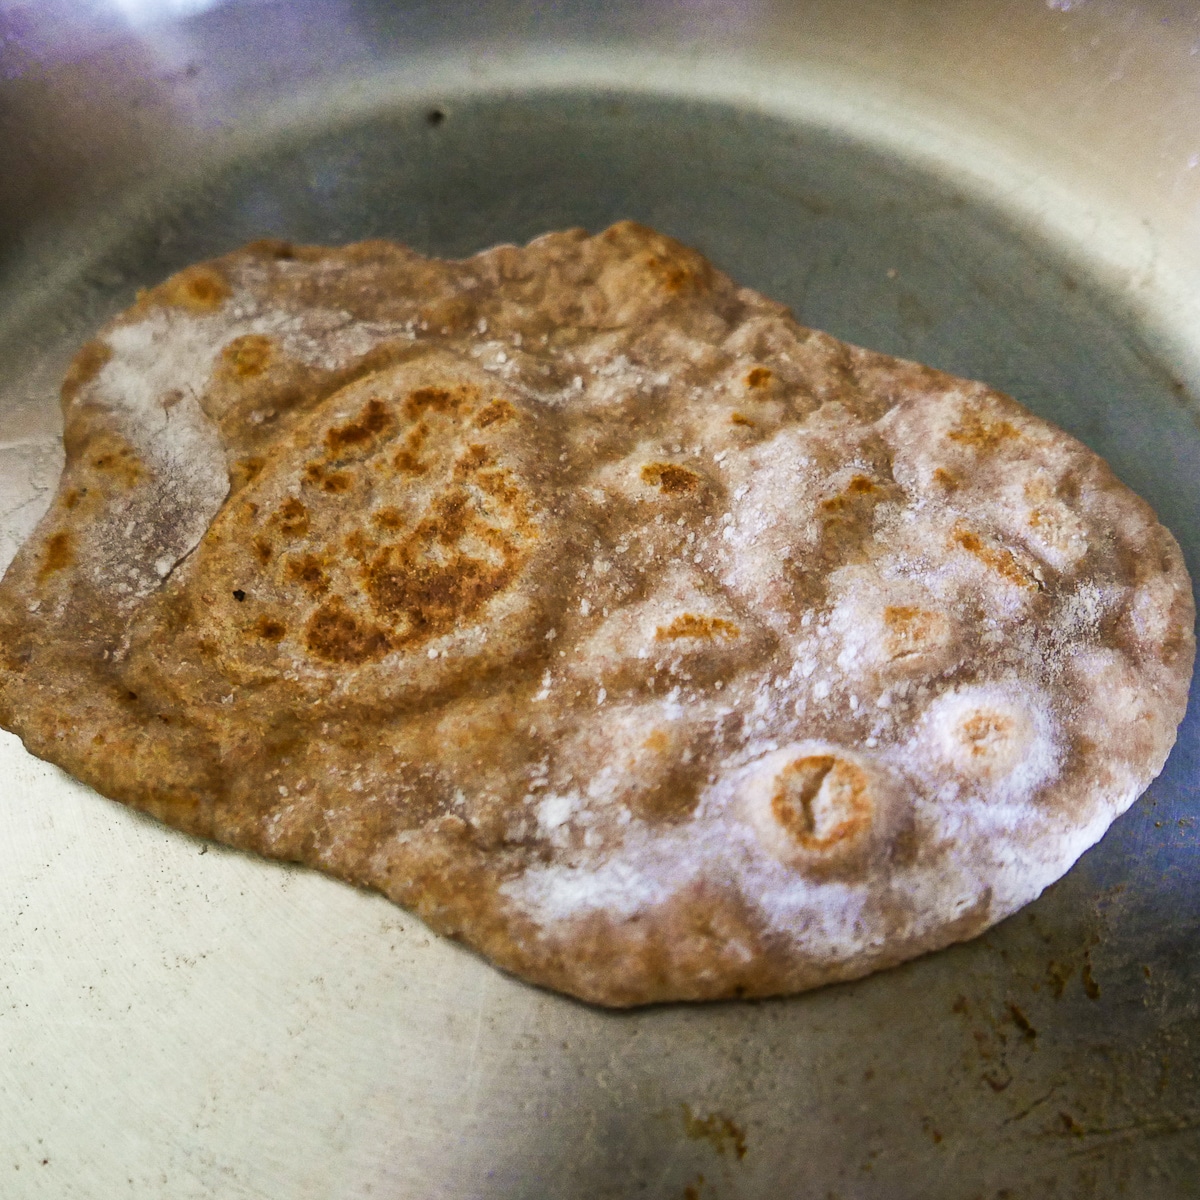 Sourdough naan being cooked in a large skillet.